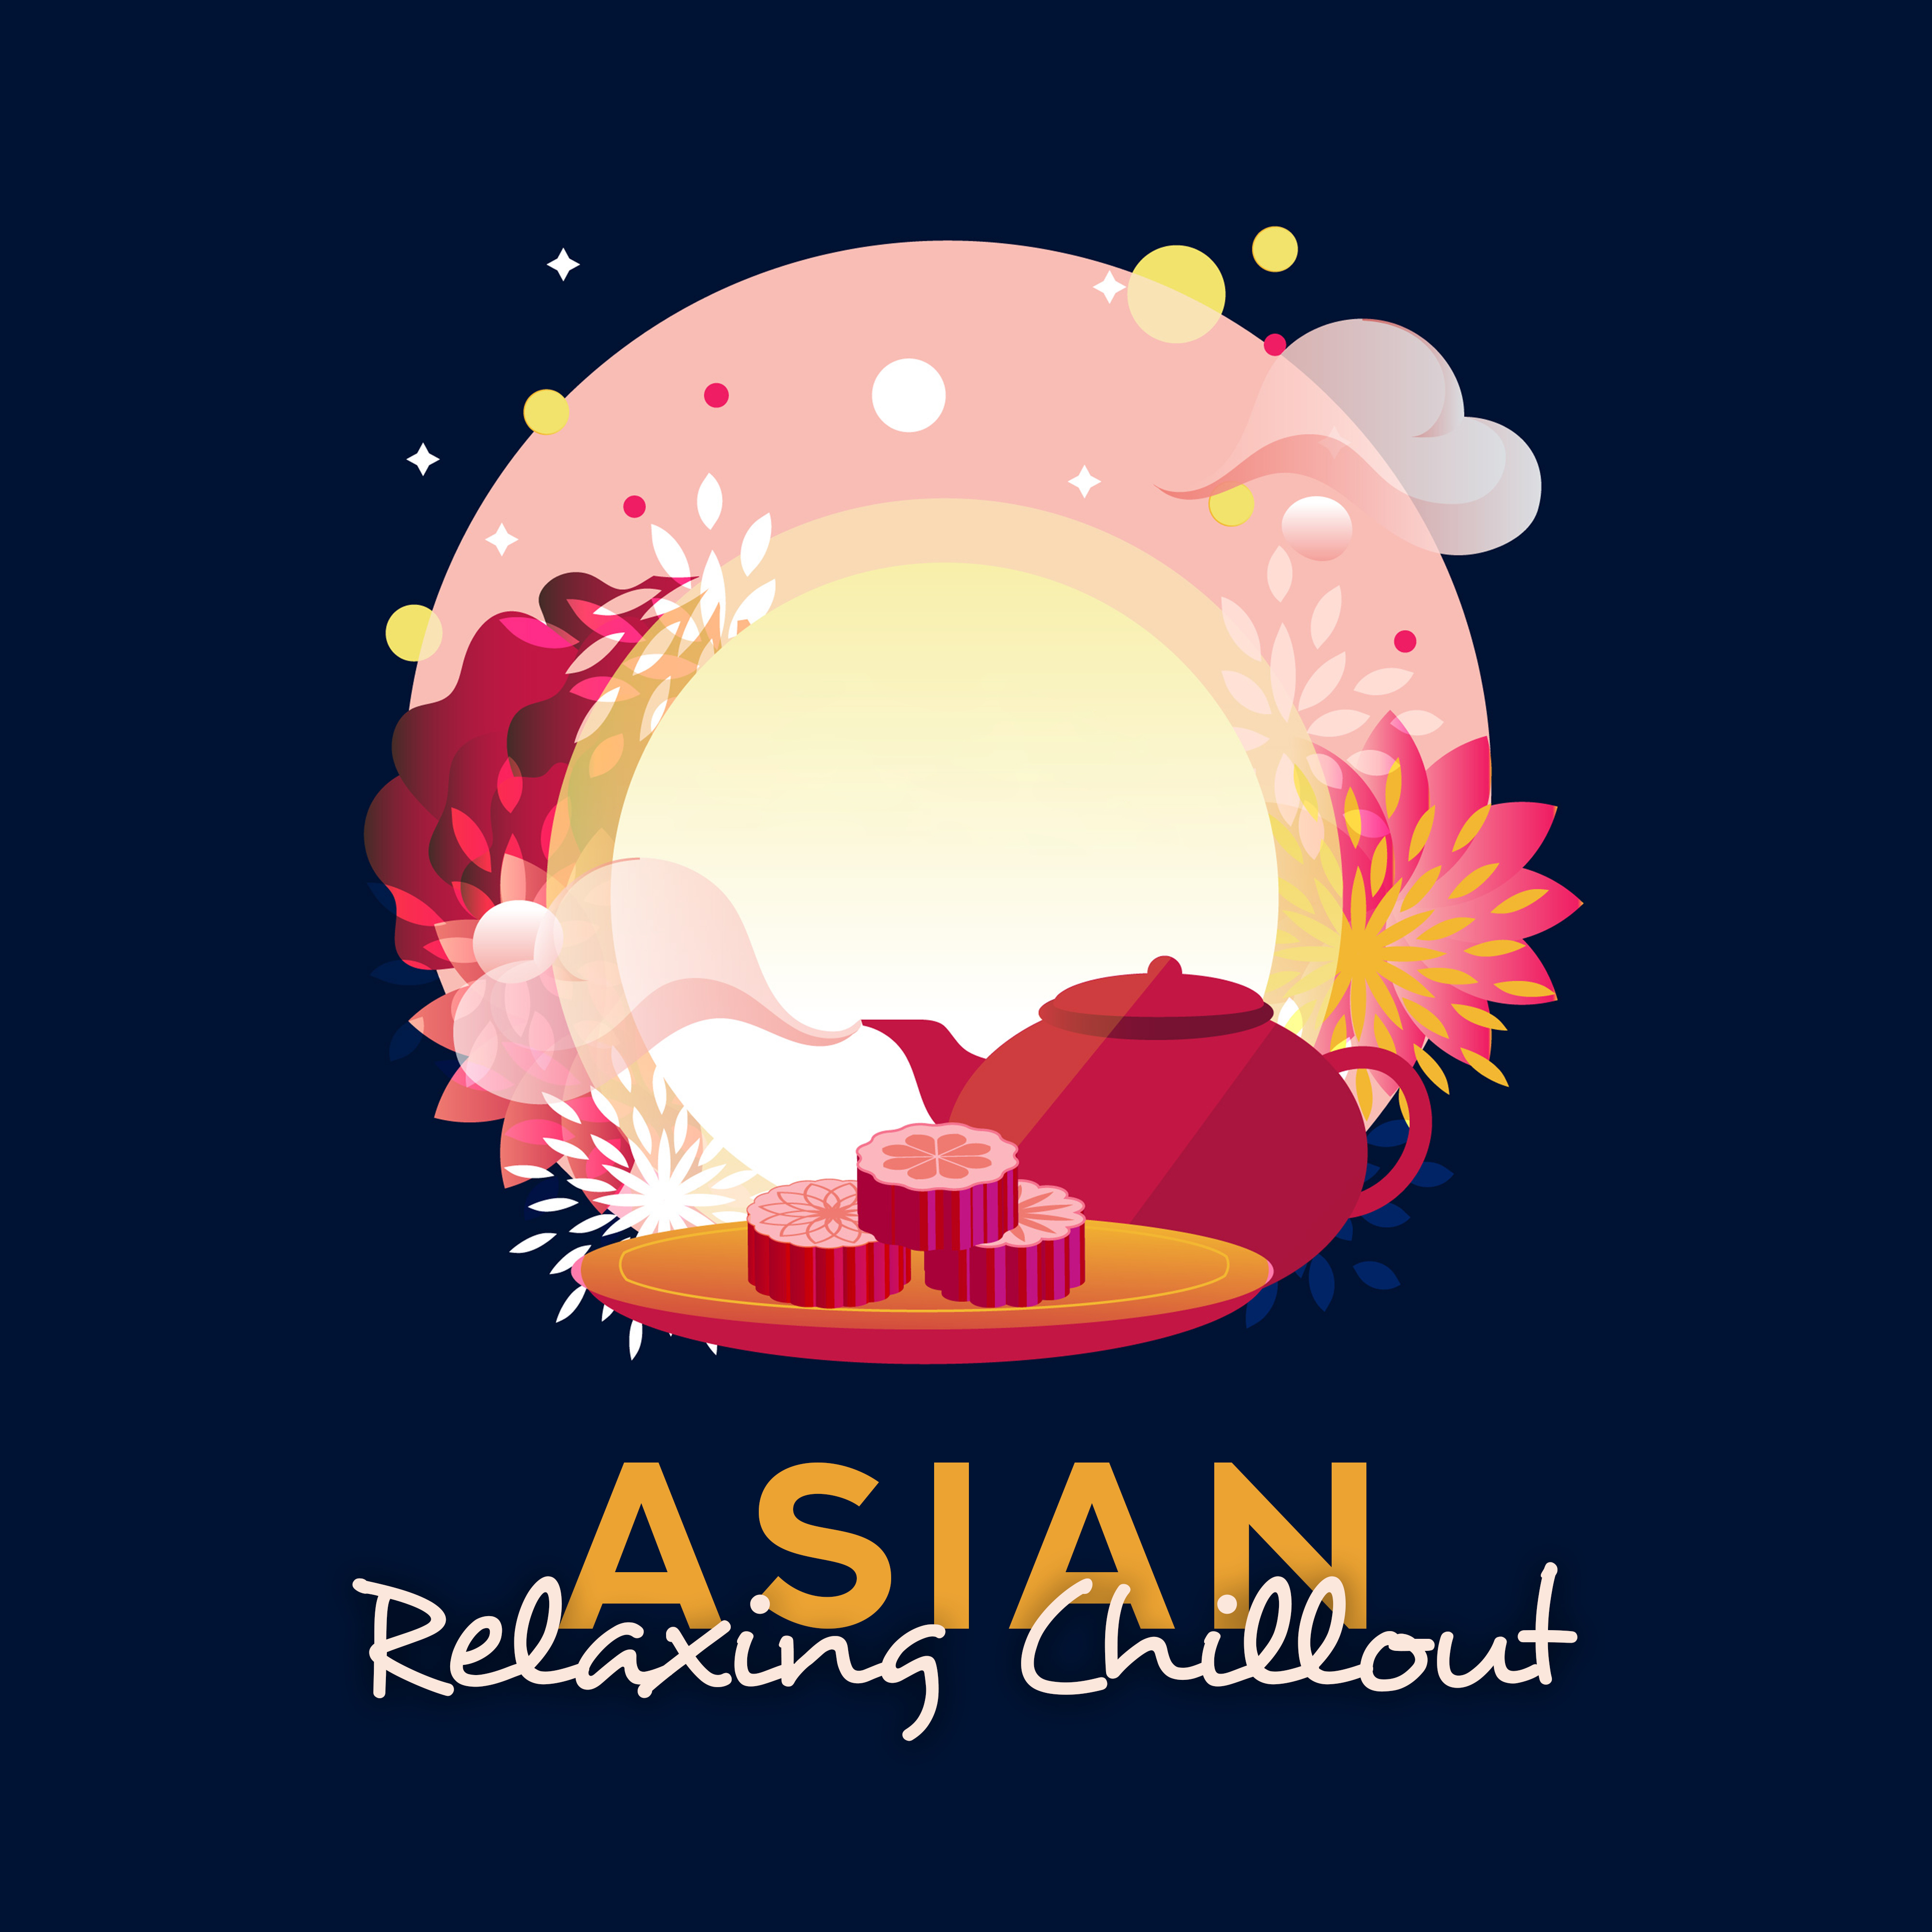 Asian Relaxing Chillout